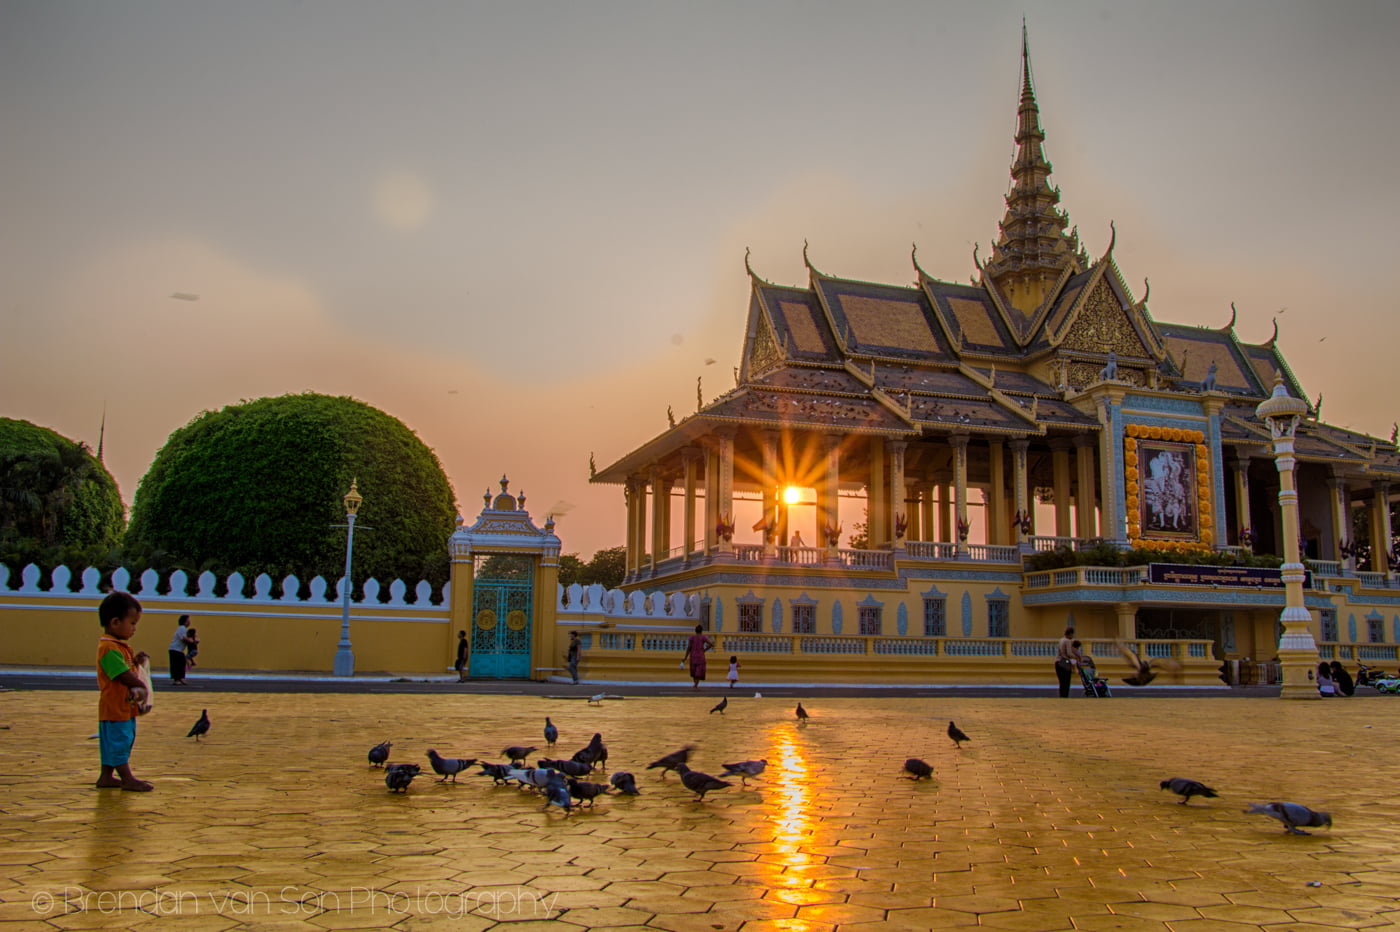 Phnom penh nightlife: 10 enticing clubs to visit on your trip!